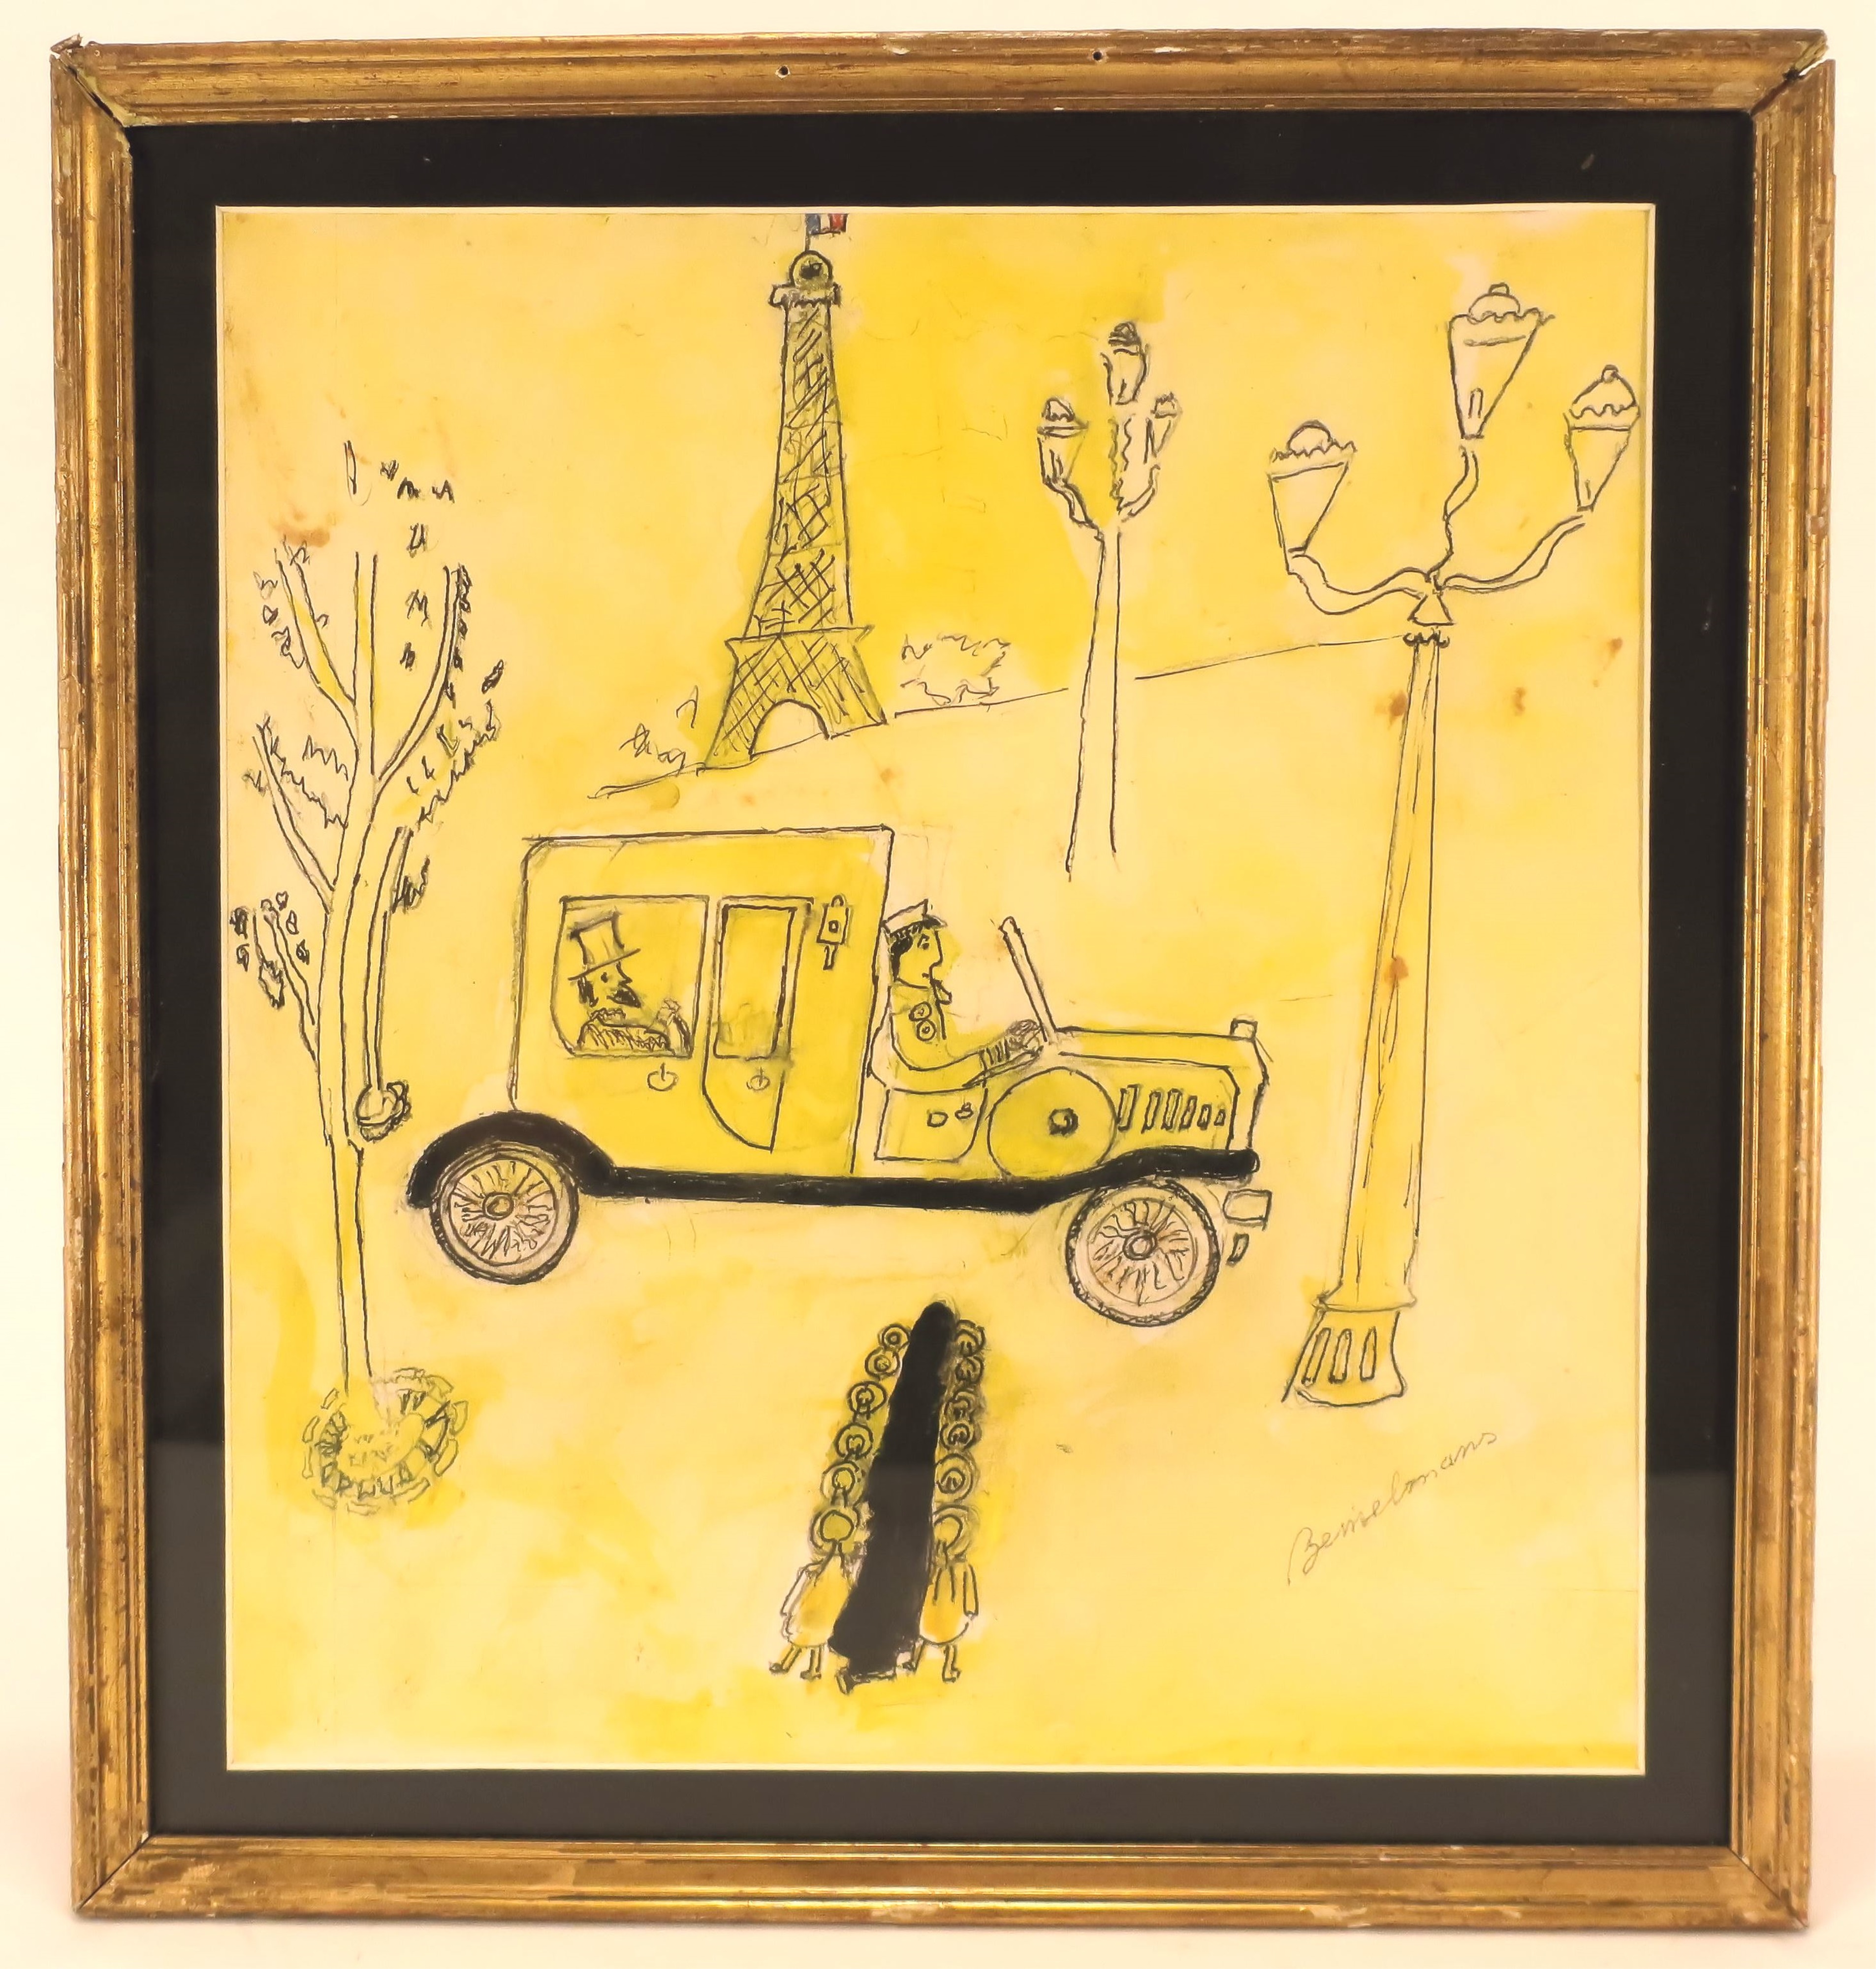 Ludwig Bemelmans, One Day The Spanish Ambassador, Watercolor. Sold For $5,750